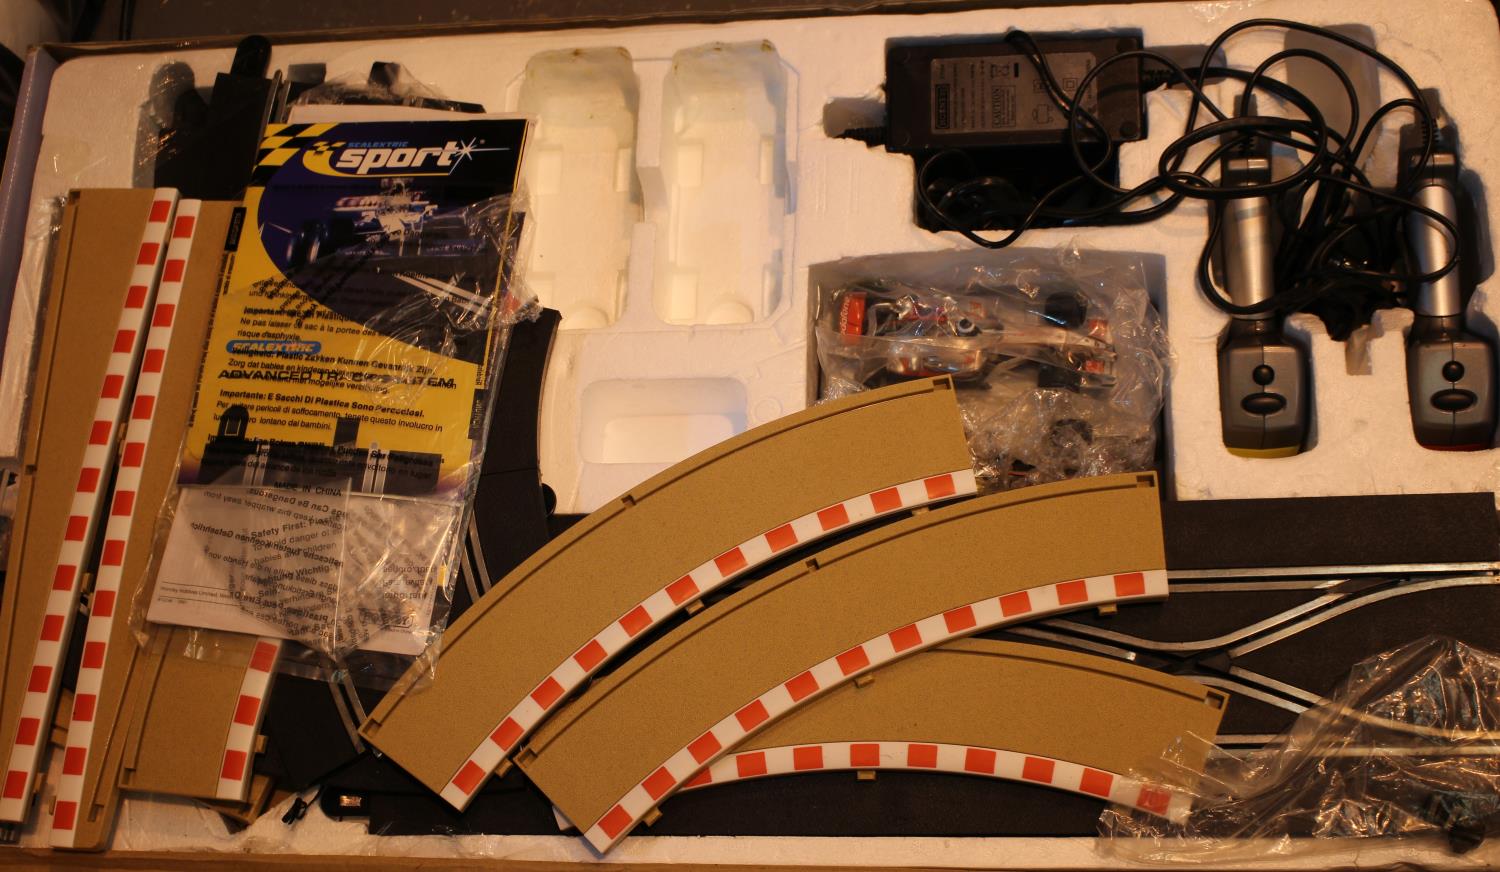 Boxed Vodafone Mercedes McLaren Scalextric set with cars. Not available for in-house P&P, contact